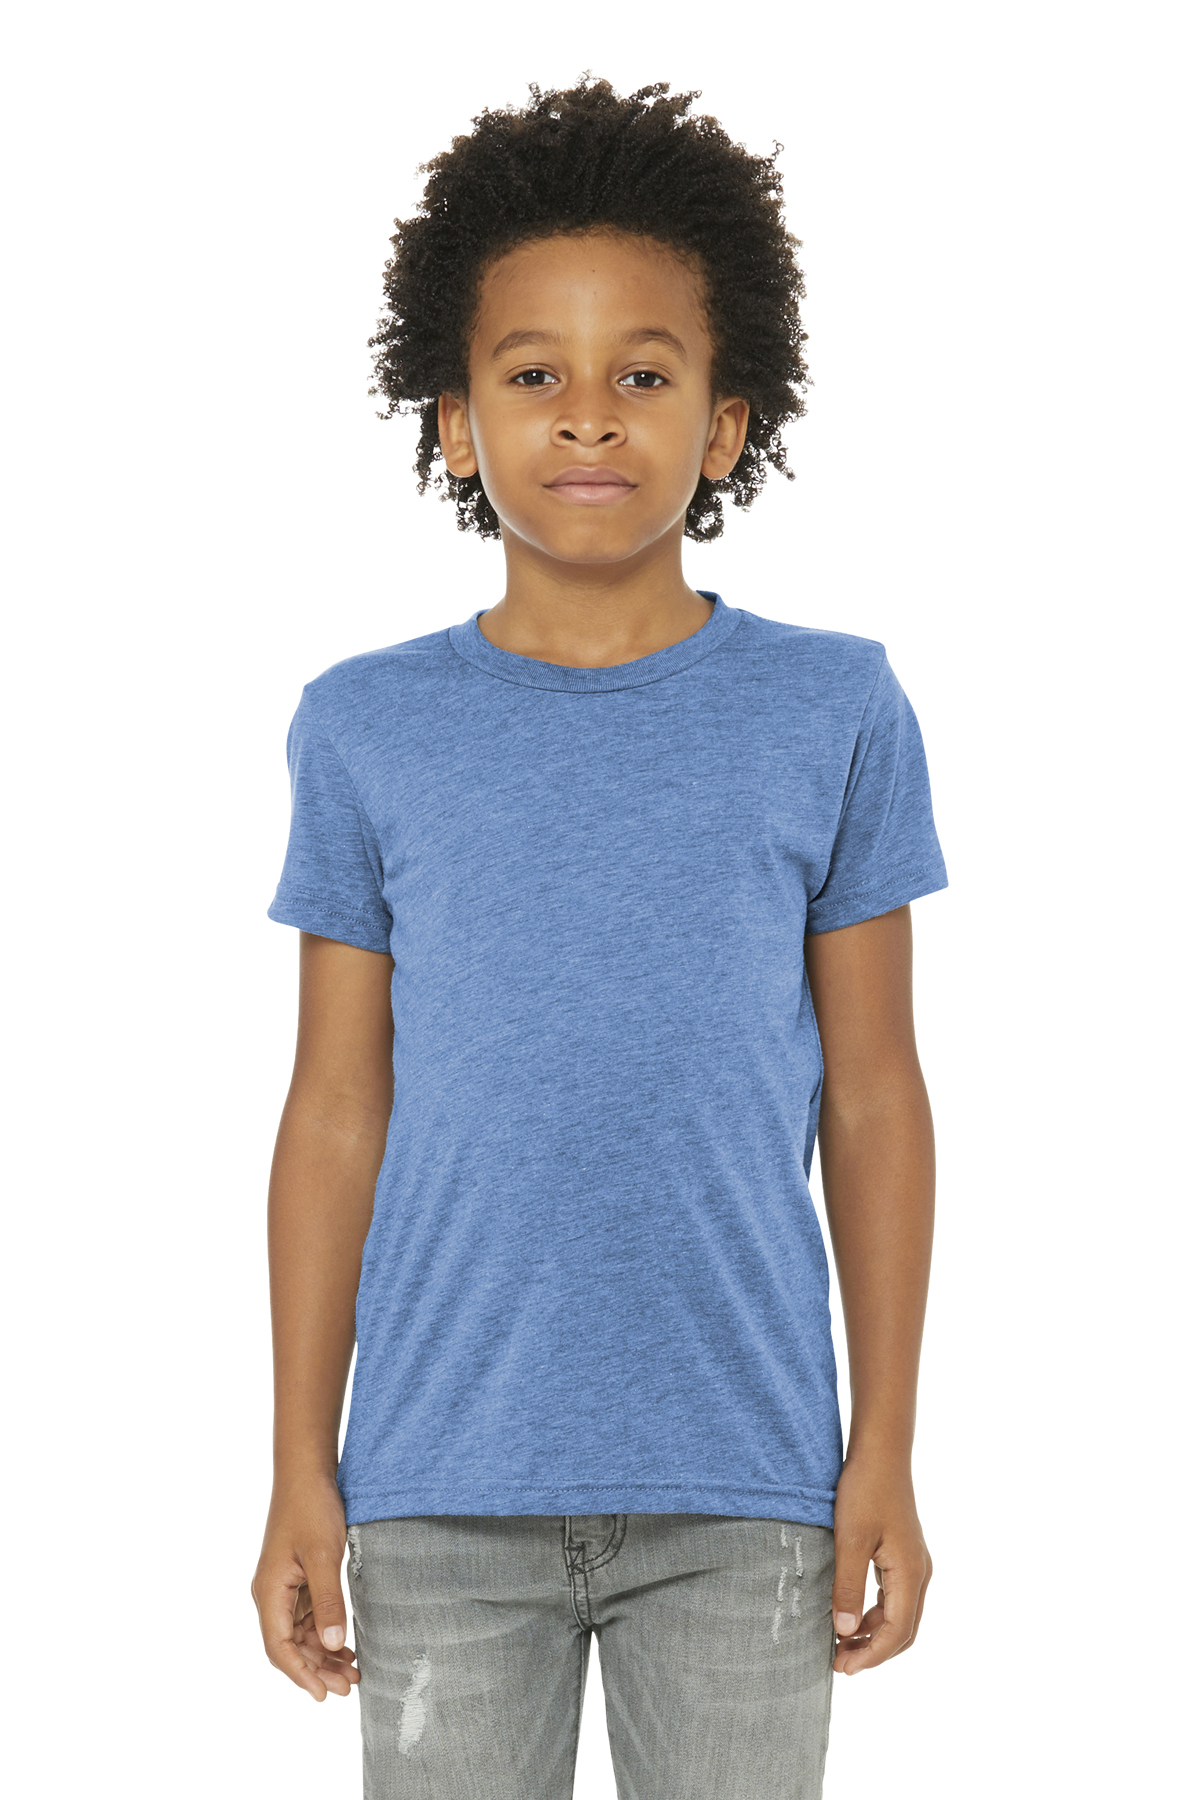 BELLA+CANVAS Youth Triblend Short Sleeve Tee | Product | SanMar